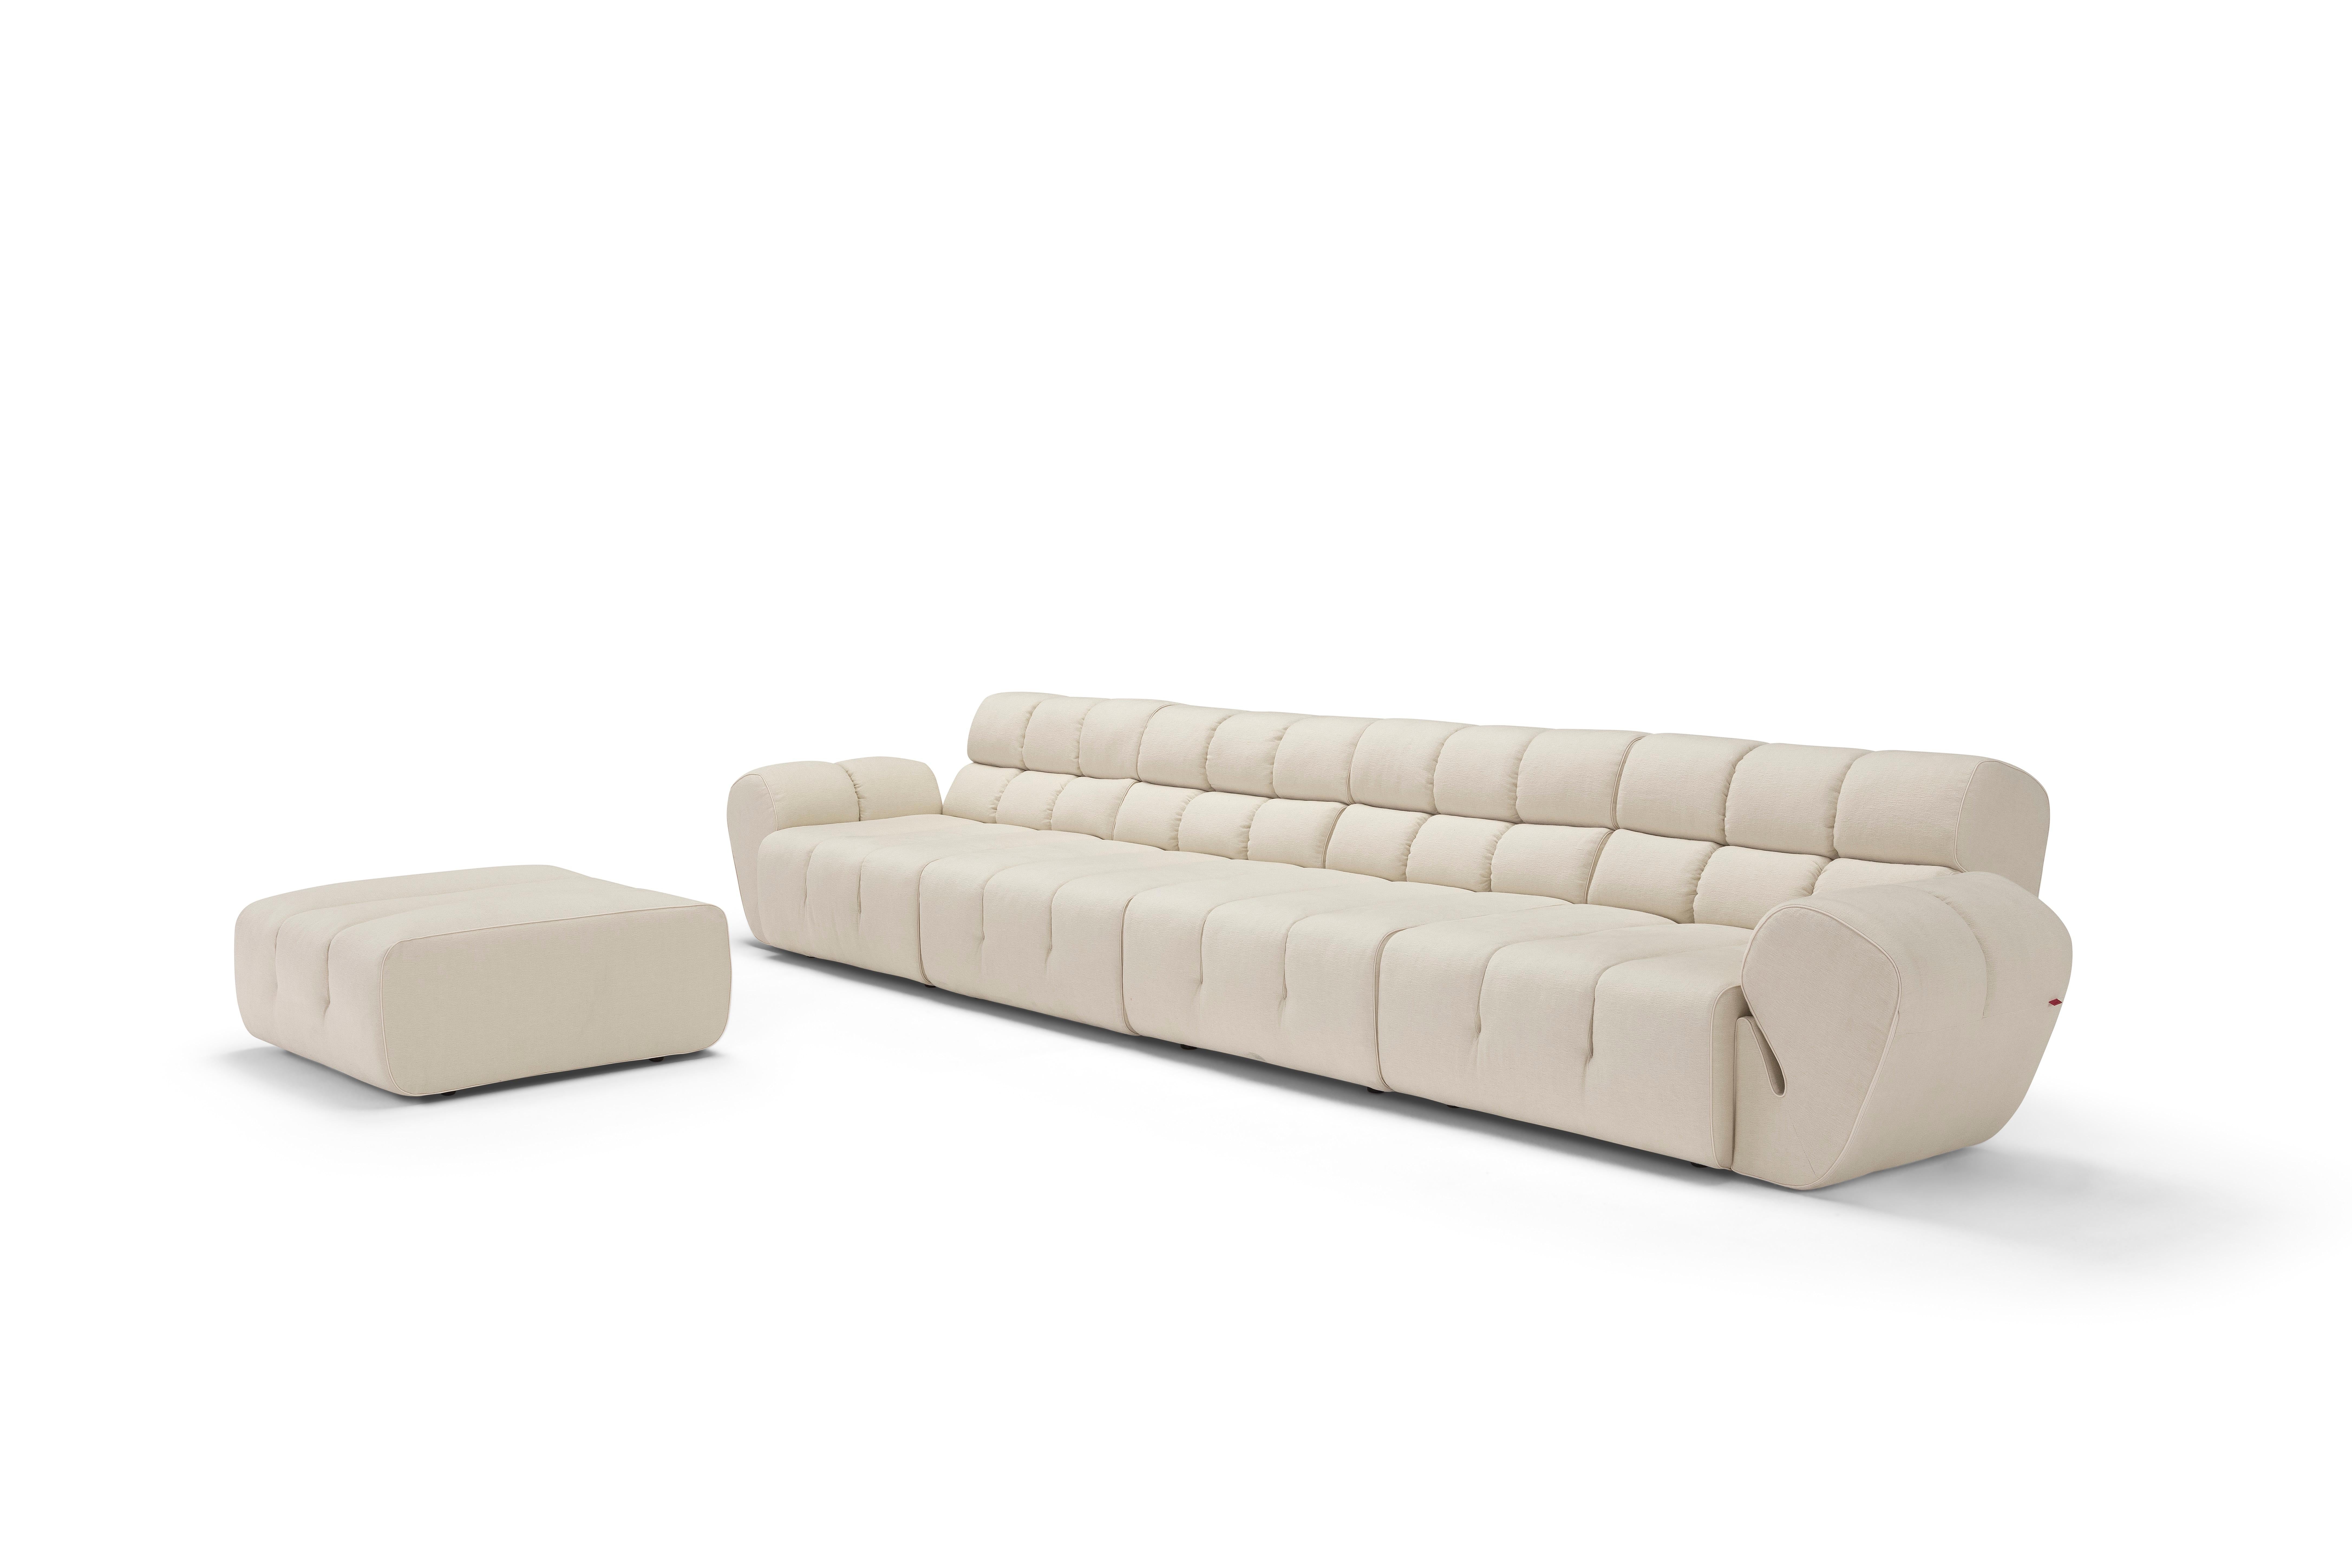 Contemporary Sectional Sofa 'Palmo' by Amura Lab, Brera 850, Ref. 13 For Sale 2